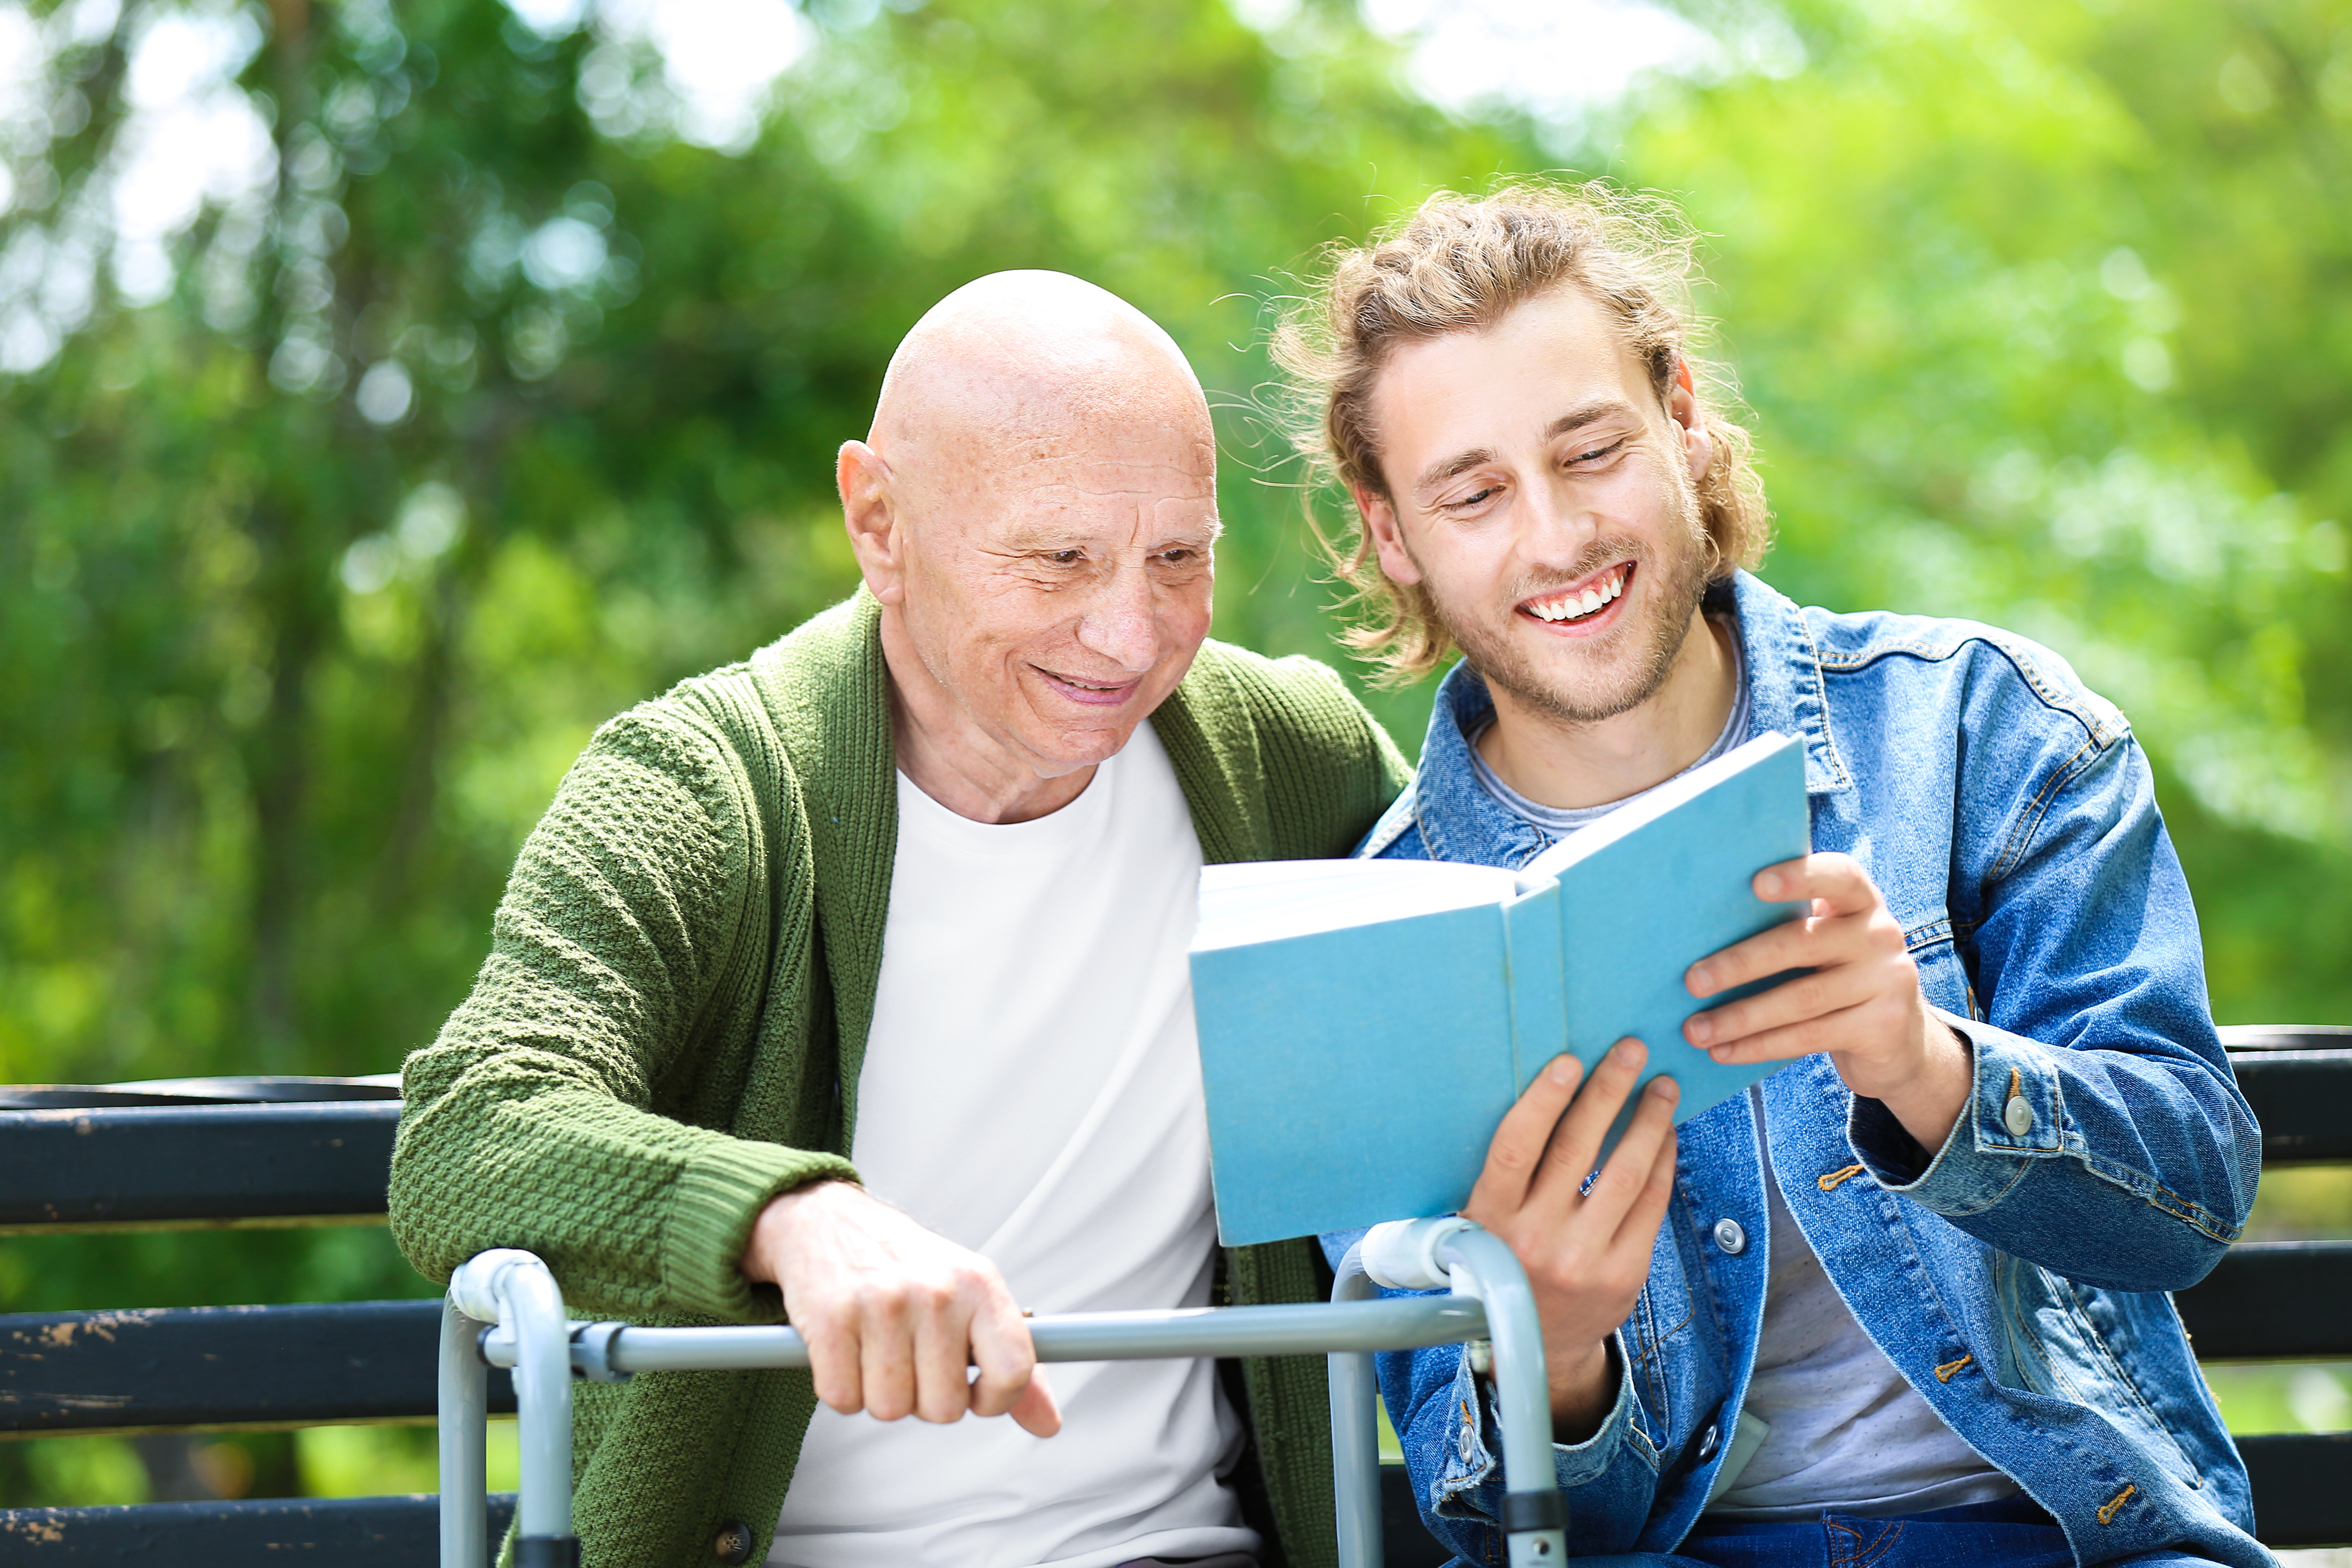 Adult man is holding a book in front of an older adult man, reading together on a bench. Older adult man is resting one hand on a walker.